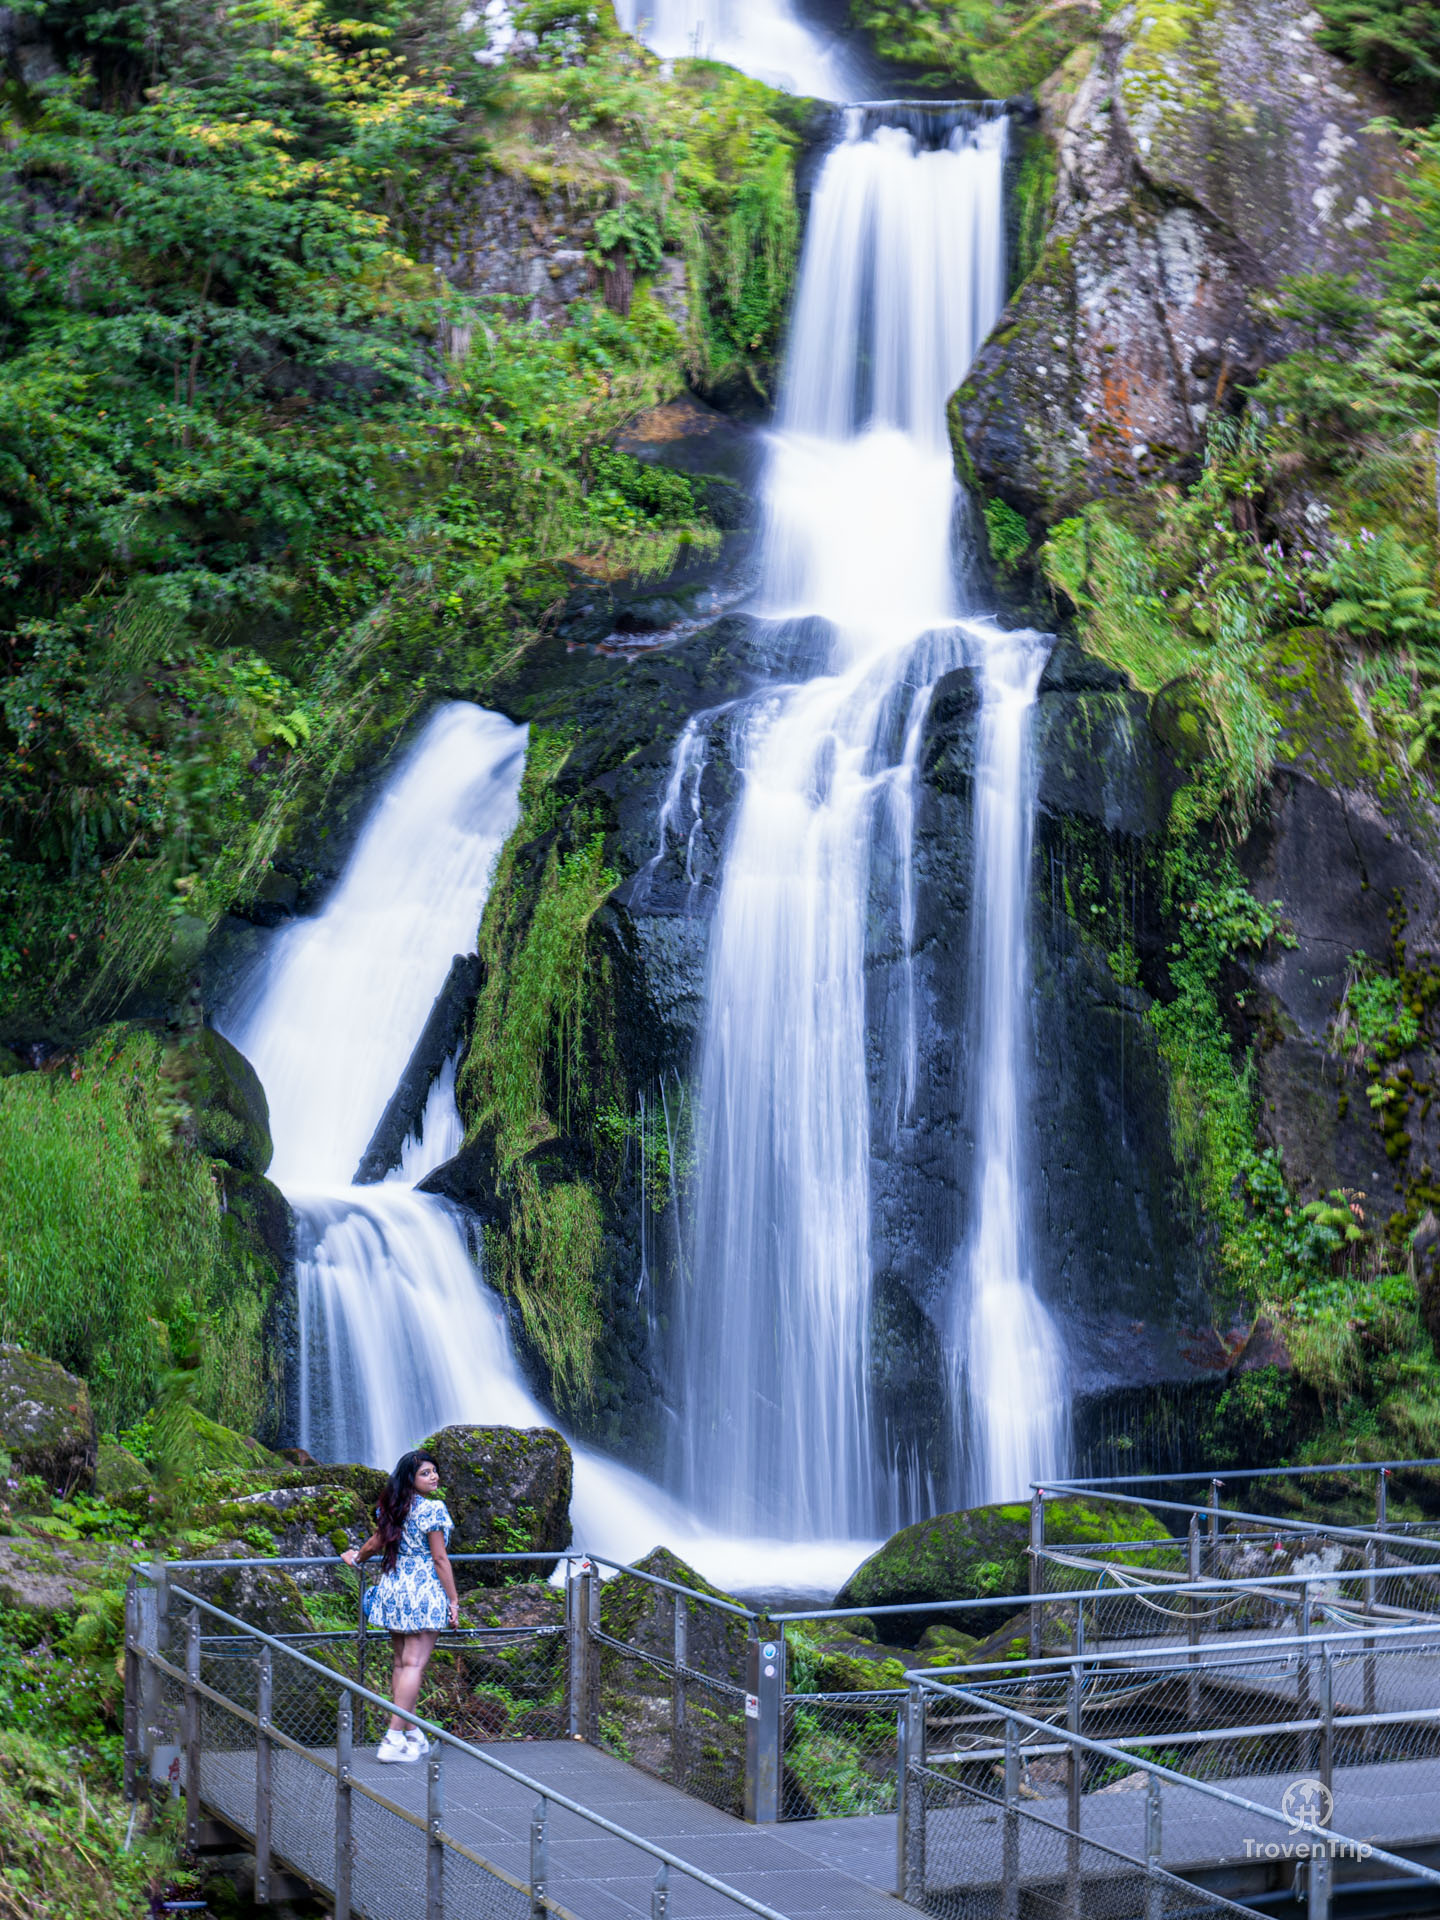 Image of the highest Waterfall in Germany in Triberg